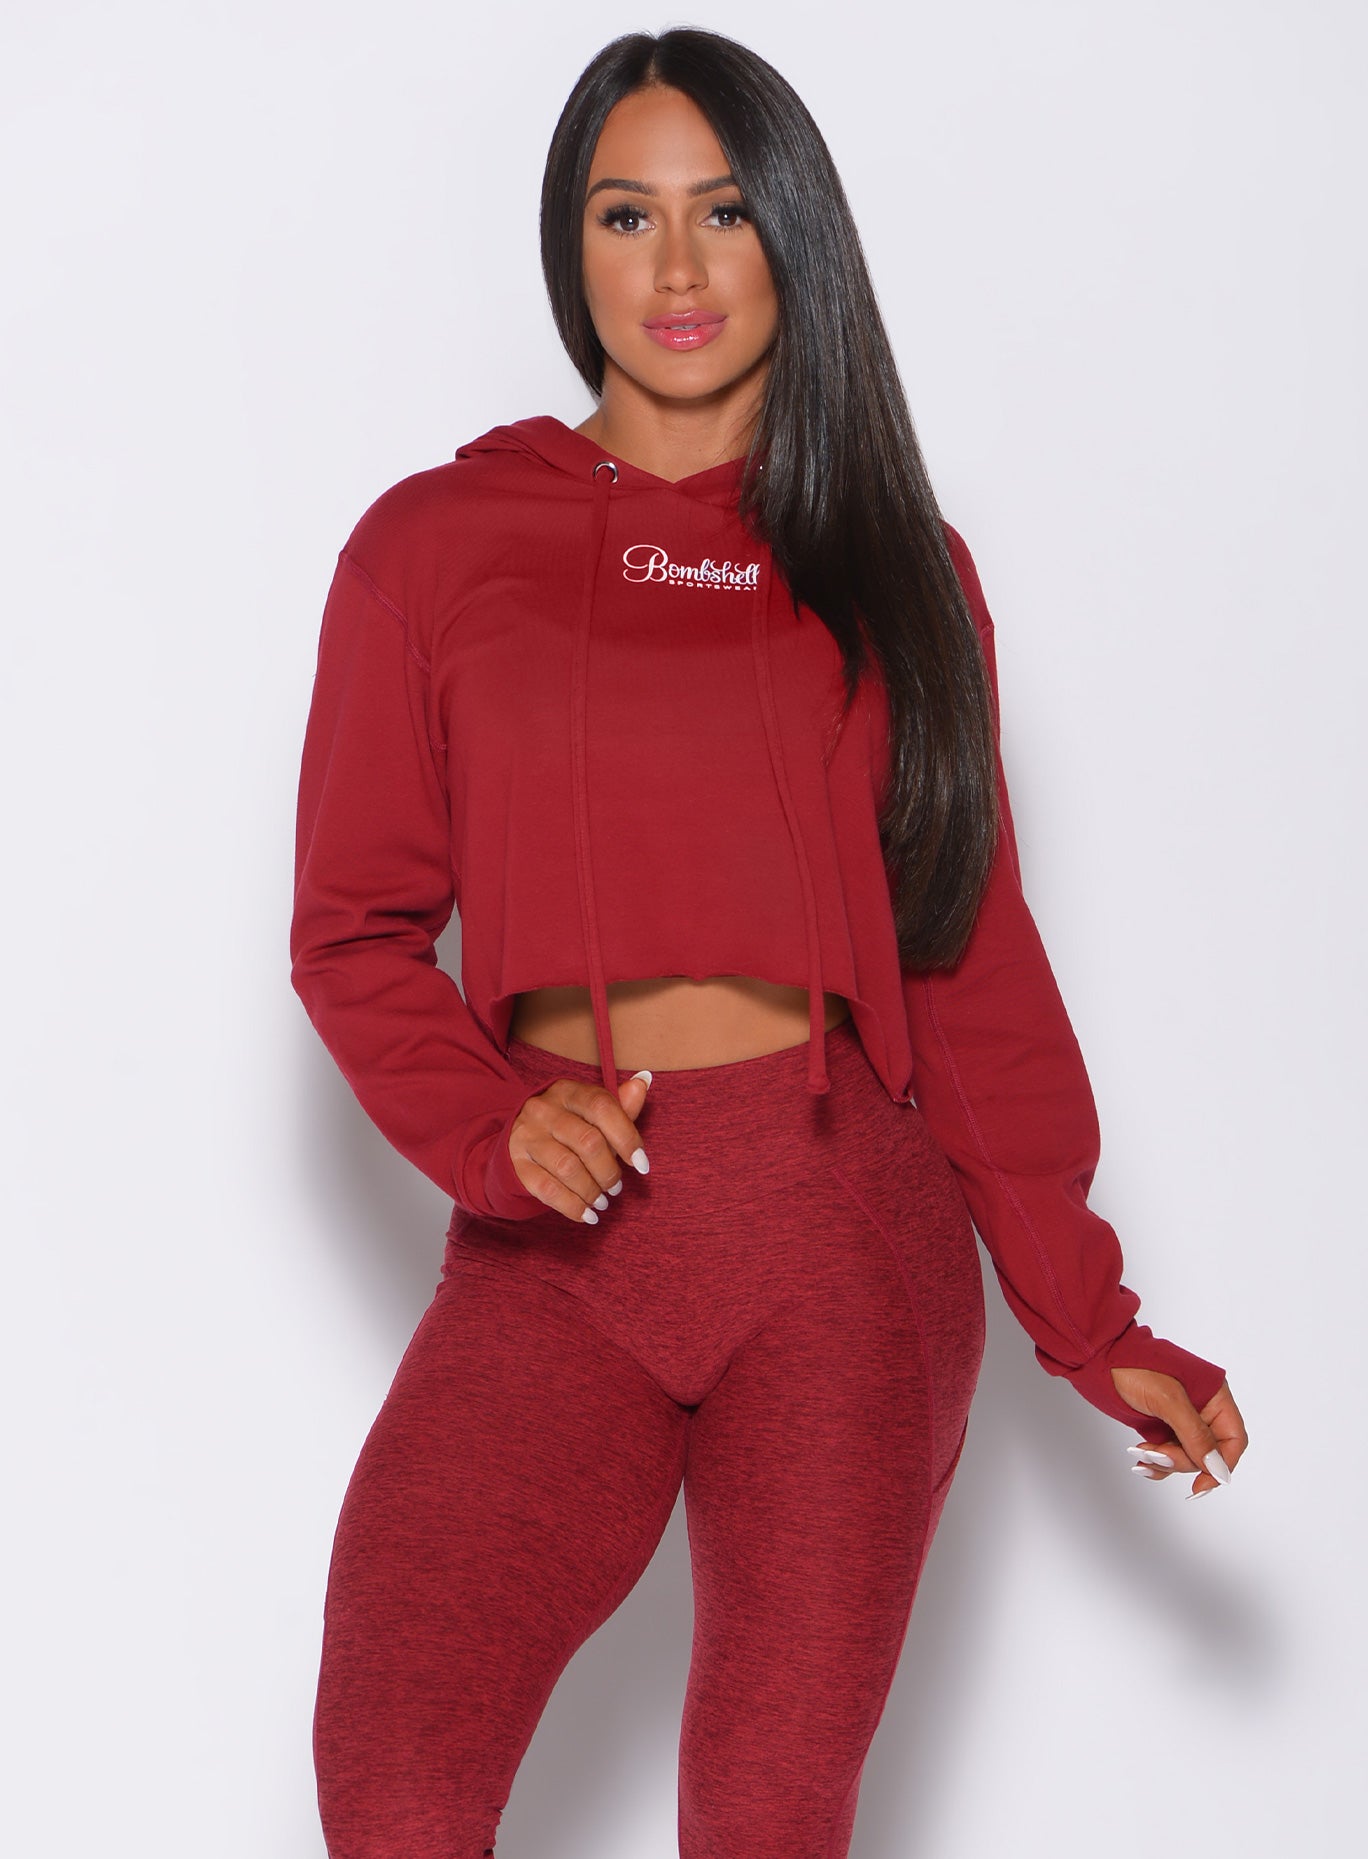 Model facing forward wearing our bombshell hoodie in red rose color and a matching leggings